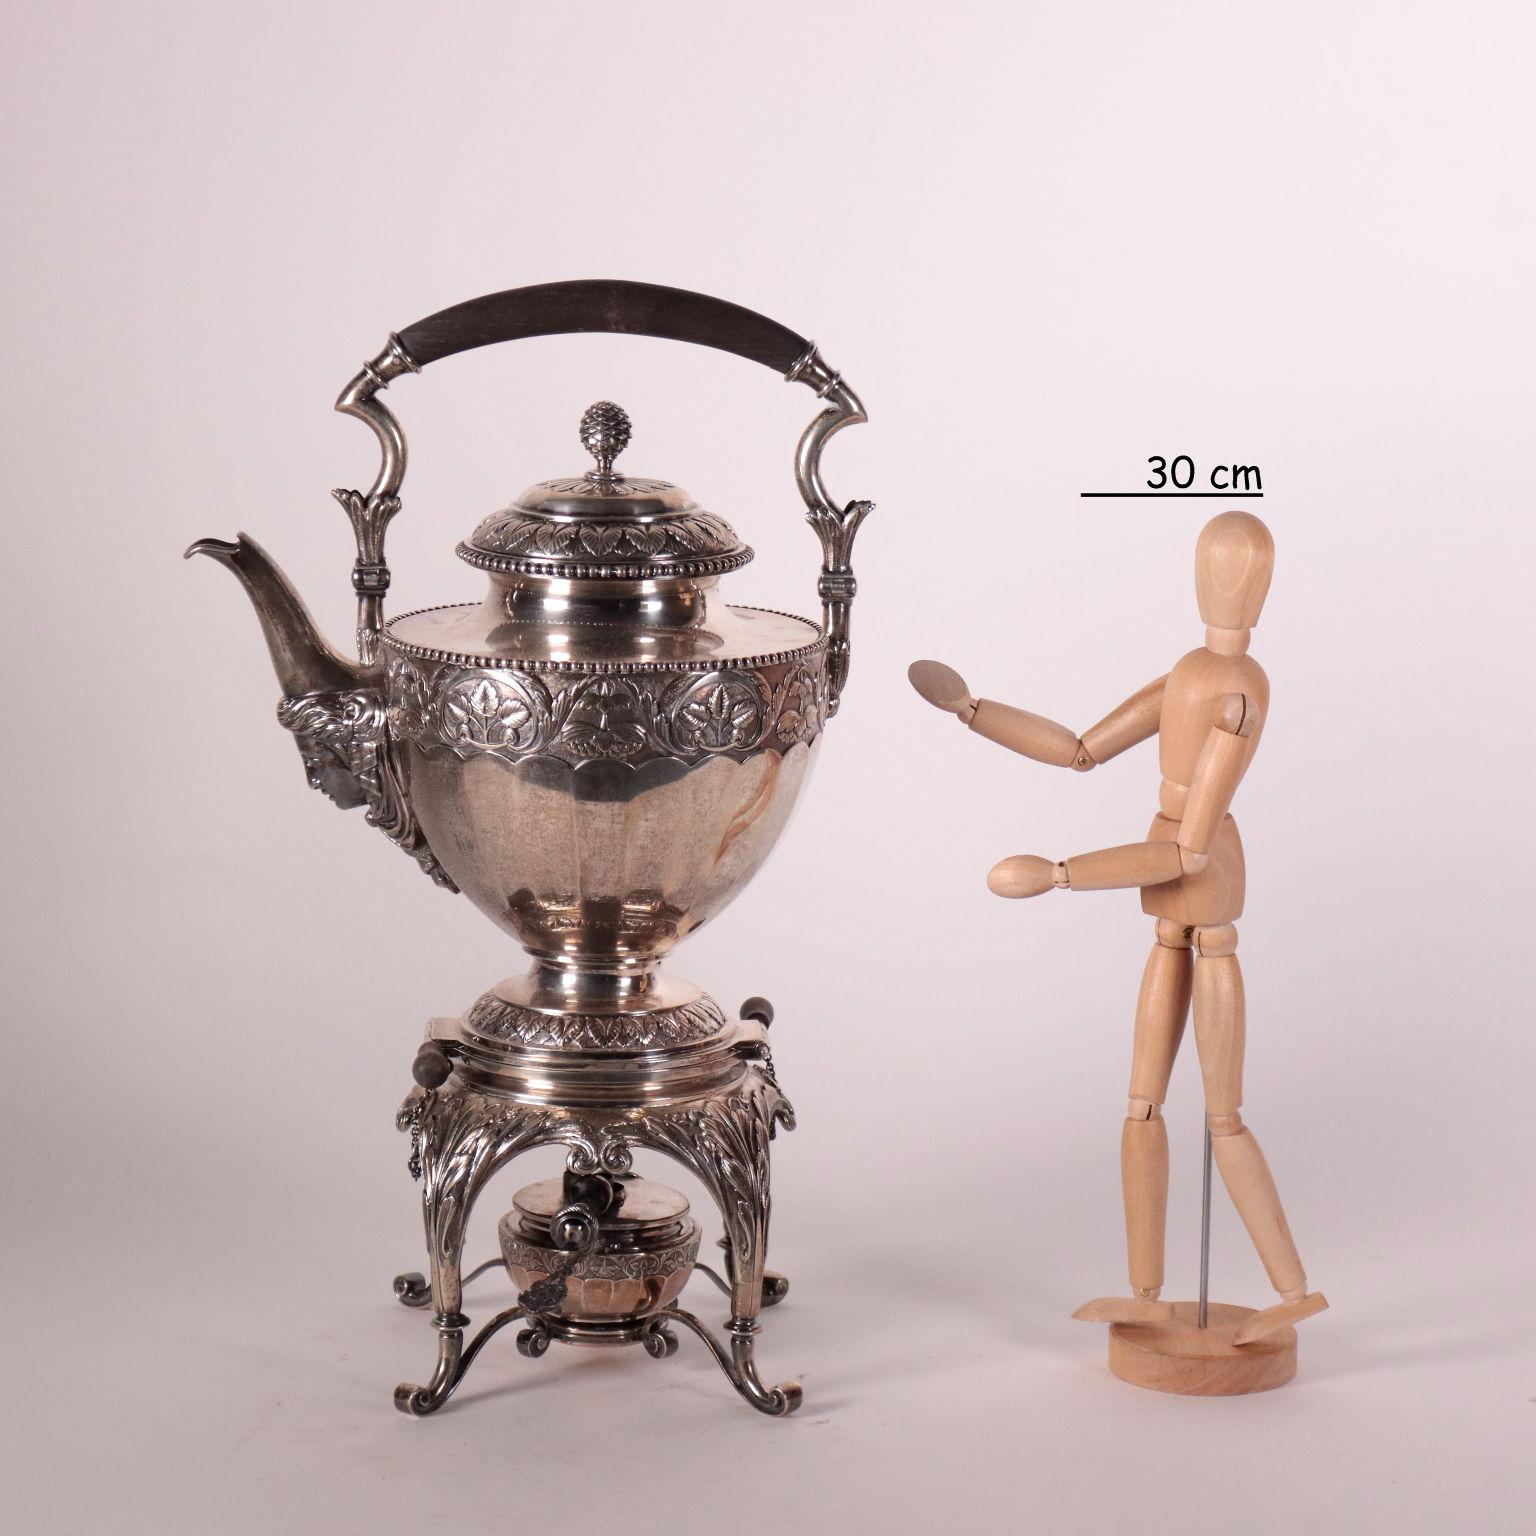 Samovar in embossed and chiselled silver with rich decorations with plant motifs and a female face under the spout. Pine cone shaped lid grip. Brand of the manufacturer engraved. Total gr. 2,500.